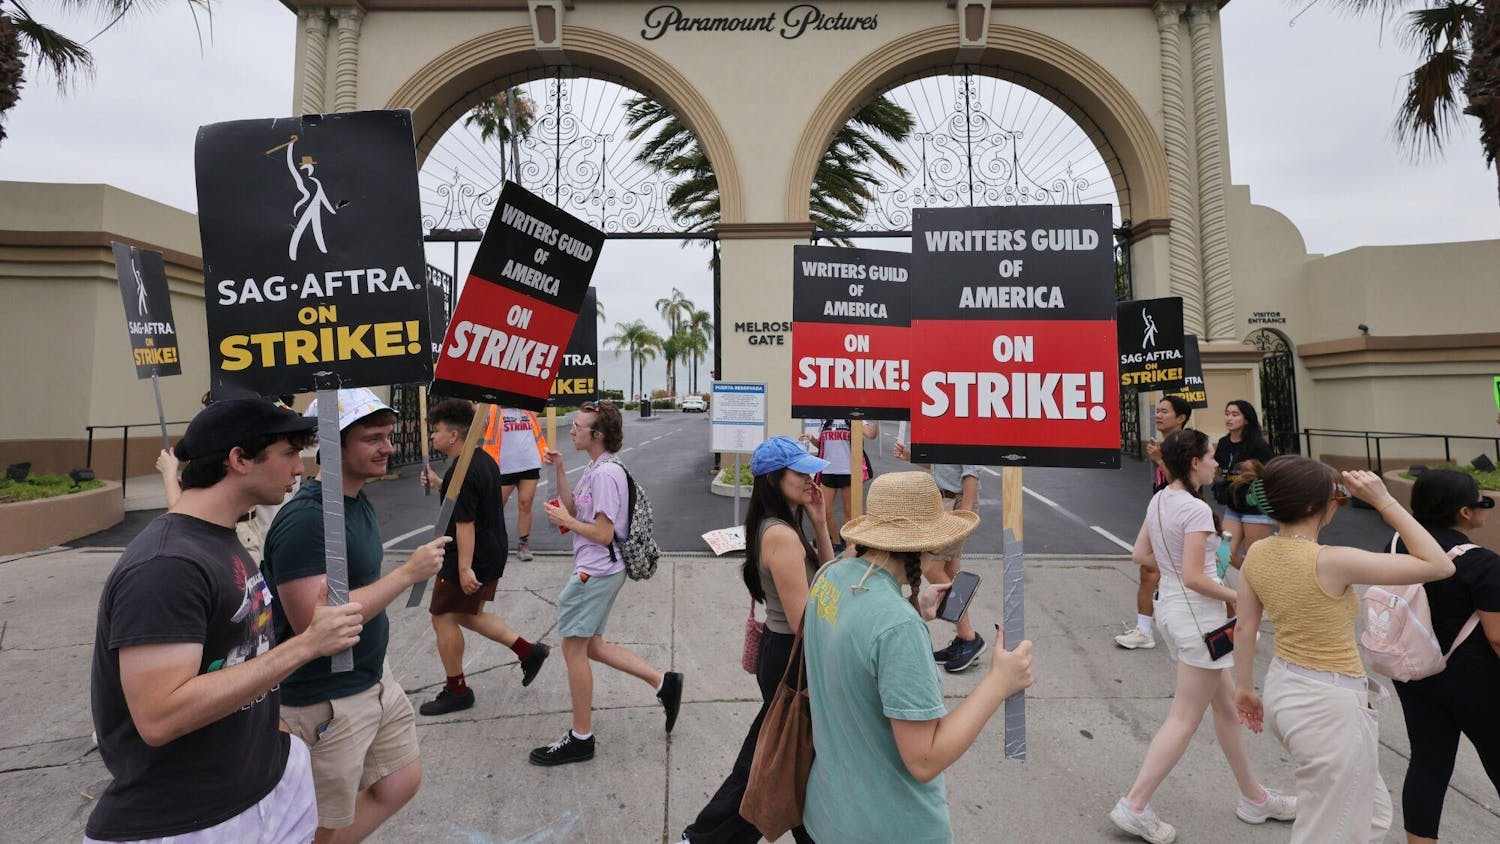 People protest wages in Hollywood. (Photo Provided by Bloomberg)